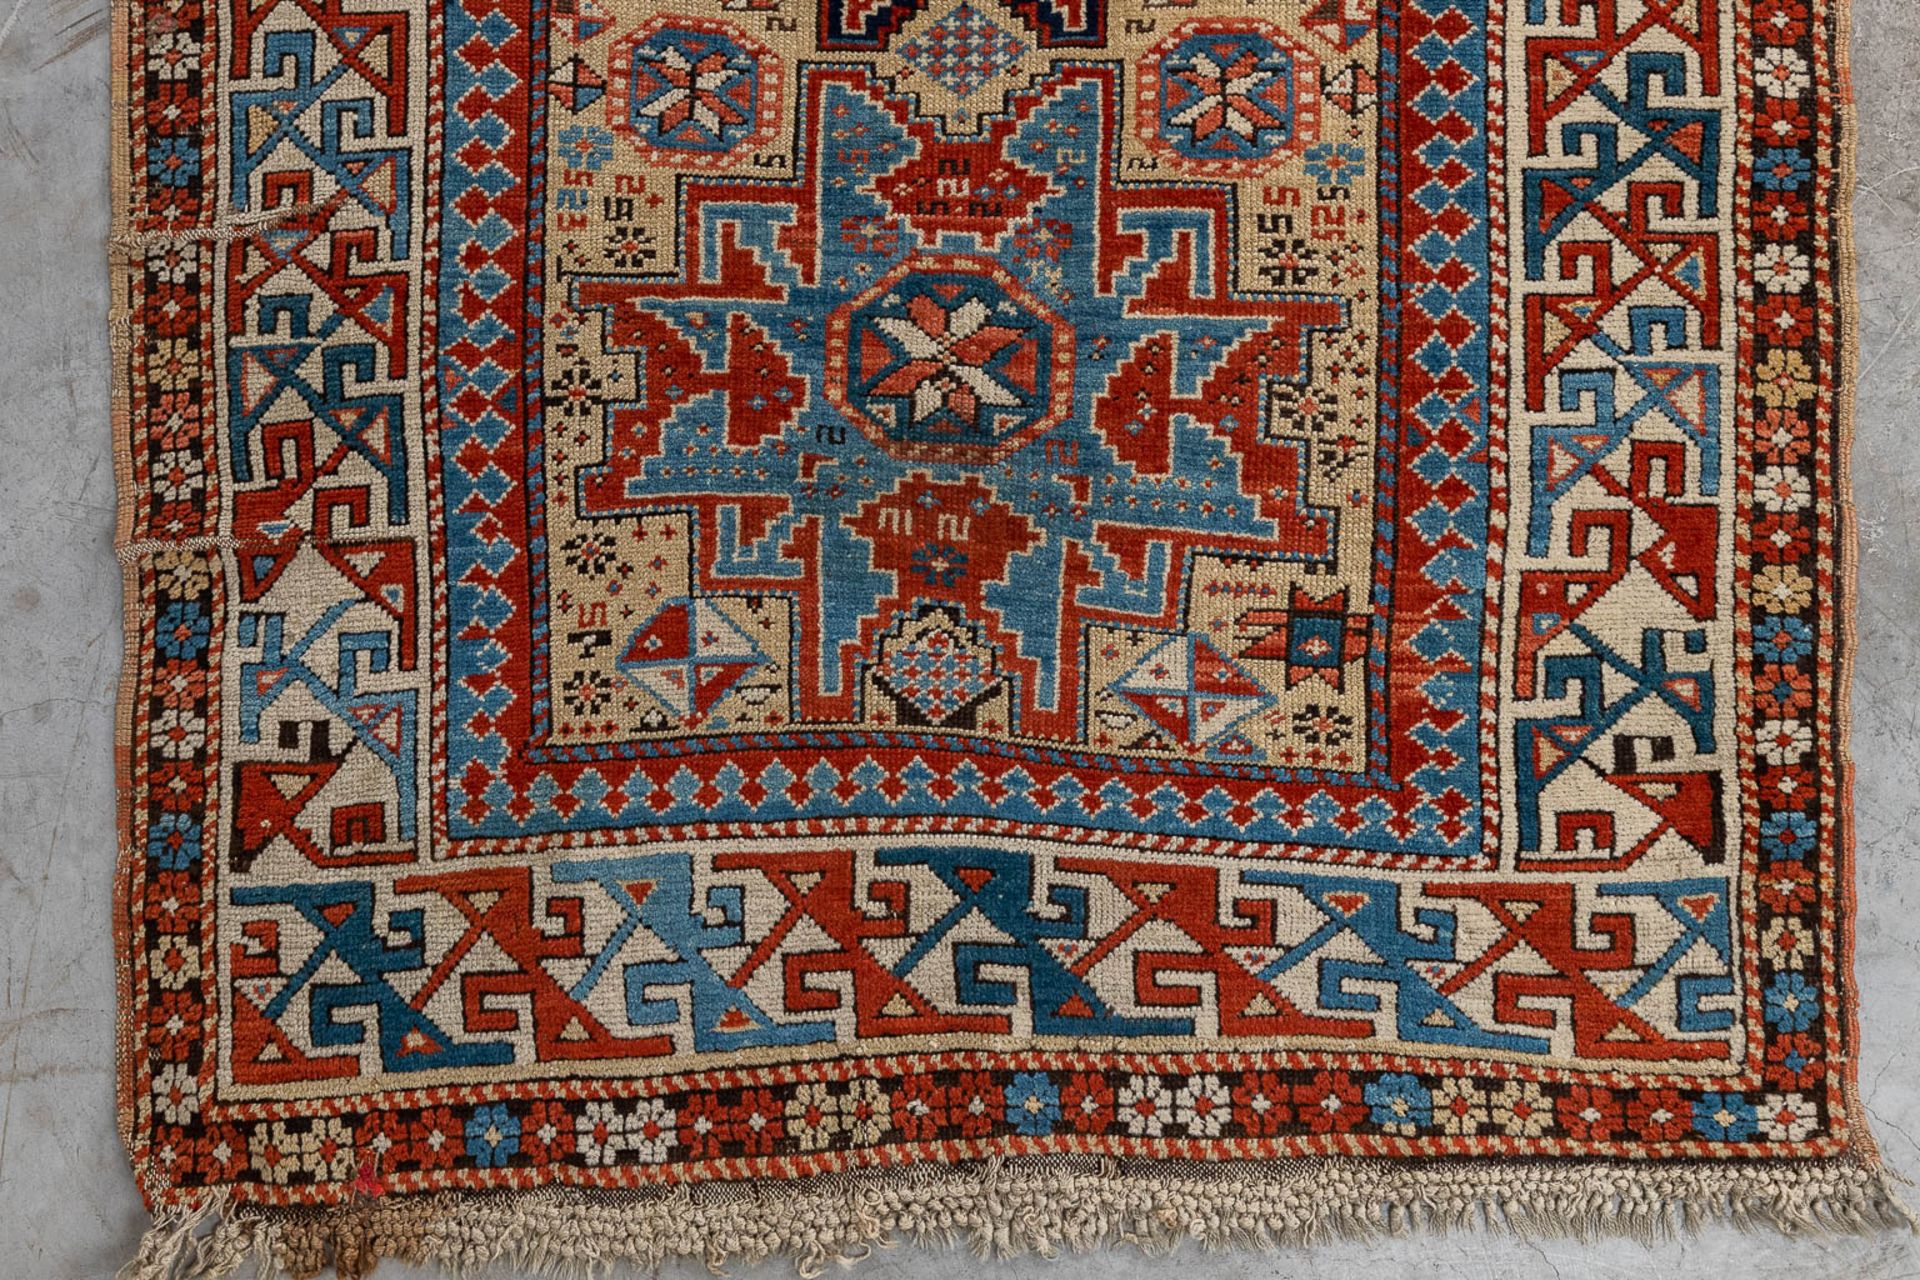 A collection of 2 Oriental hand-made carpets. Probably Caucasian. (L: 277 x W: 115 cm) - Image 7 of 12